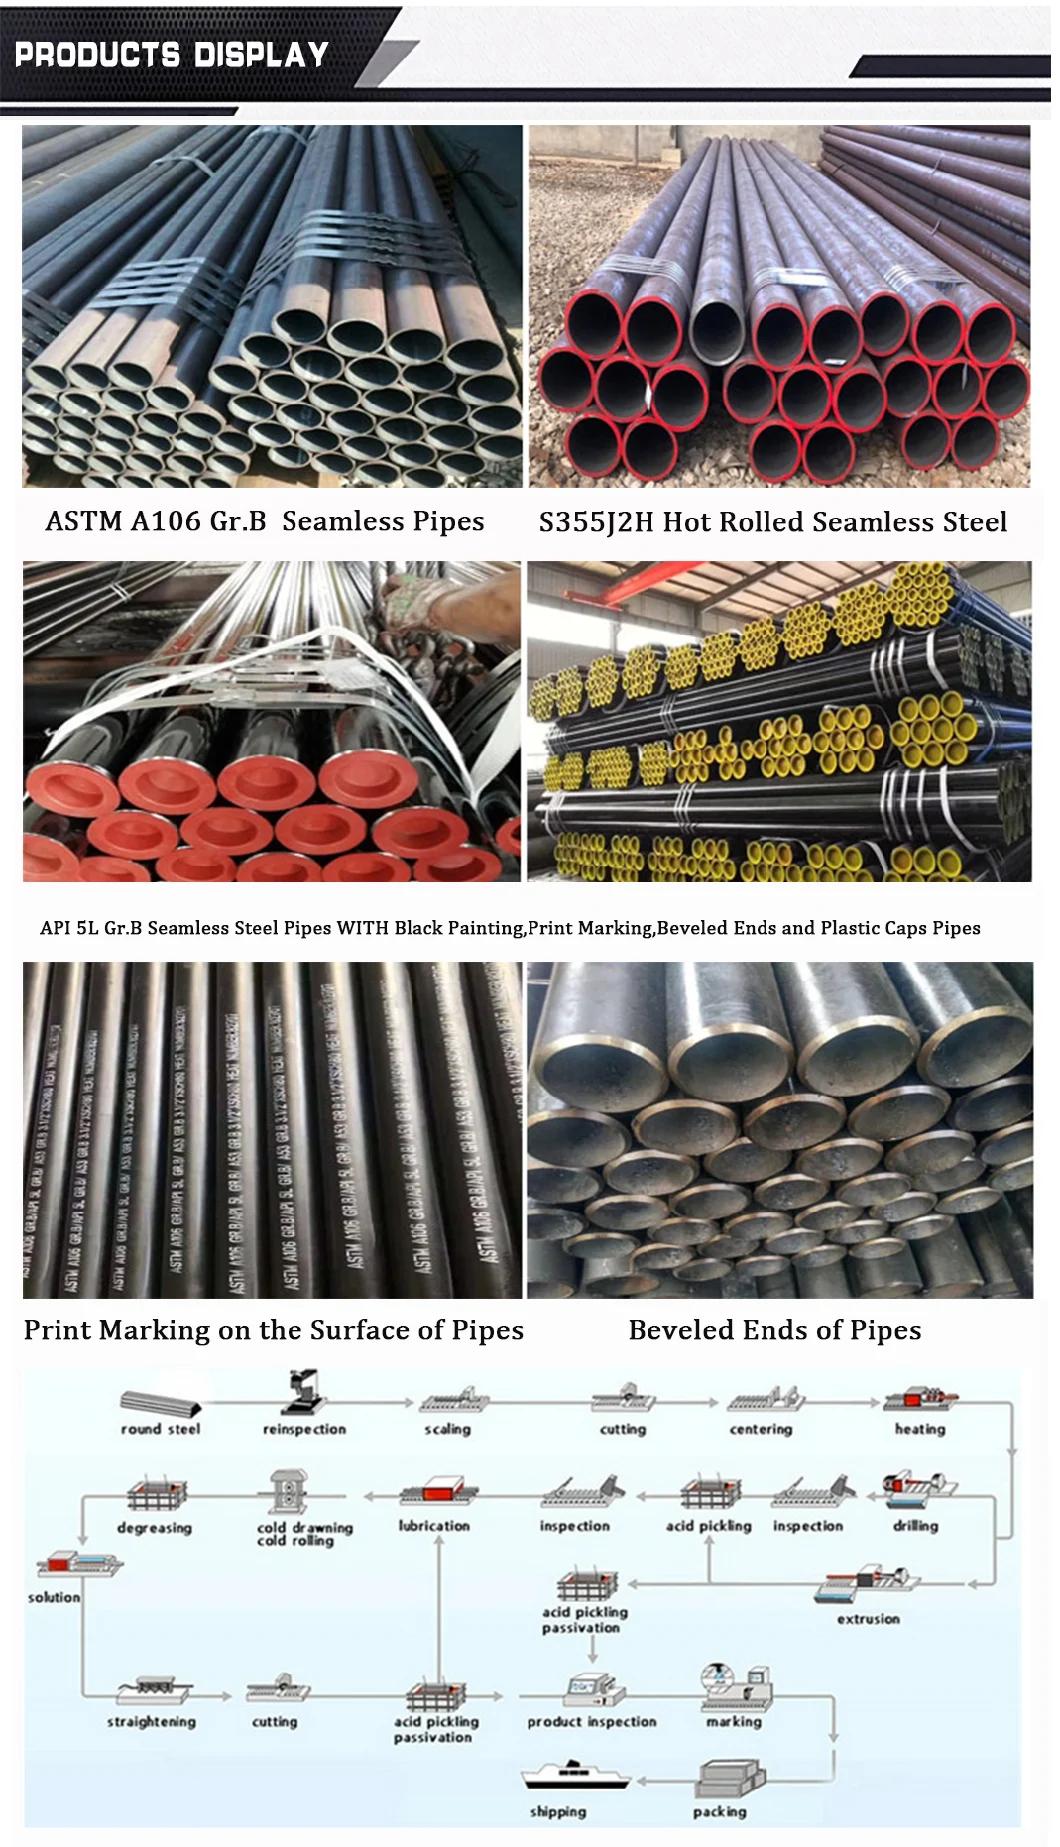 API 5L Sch10 Sch40 Sch80 X42 X46 X52 Welded Seamless Tube Carbon Steel Oil Pipe with Low Price